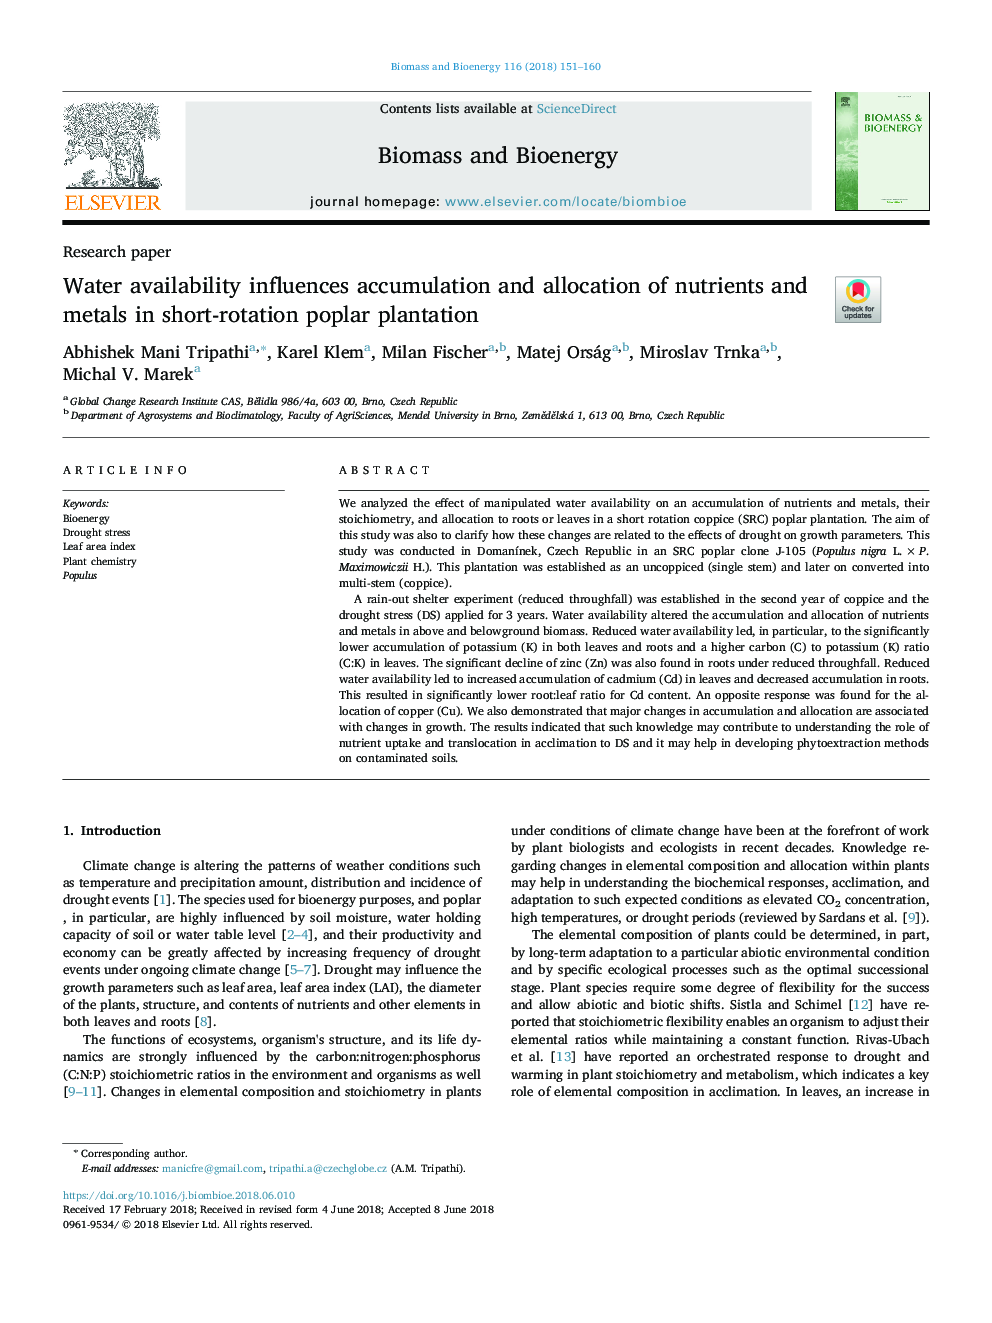 Water availability influences accumulation and allocation of nutrients and metals in short-rotation poplar plantation